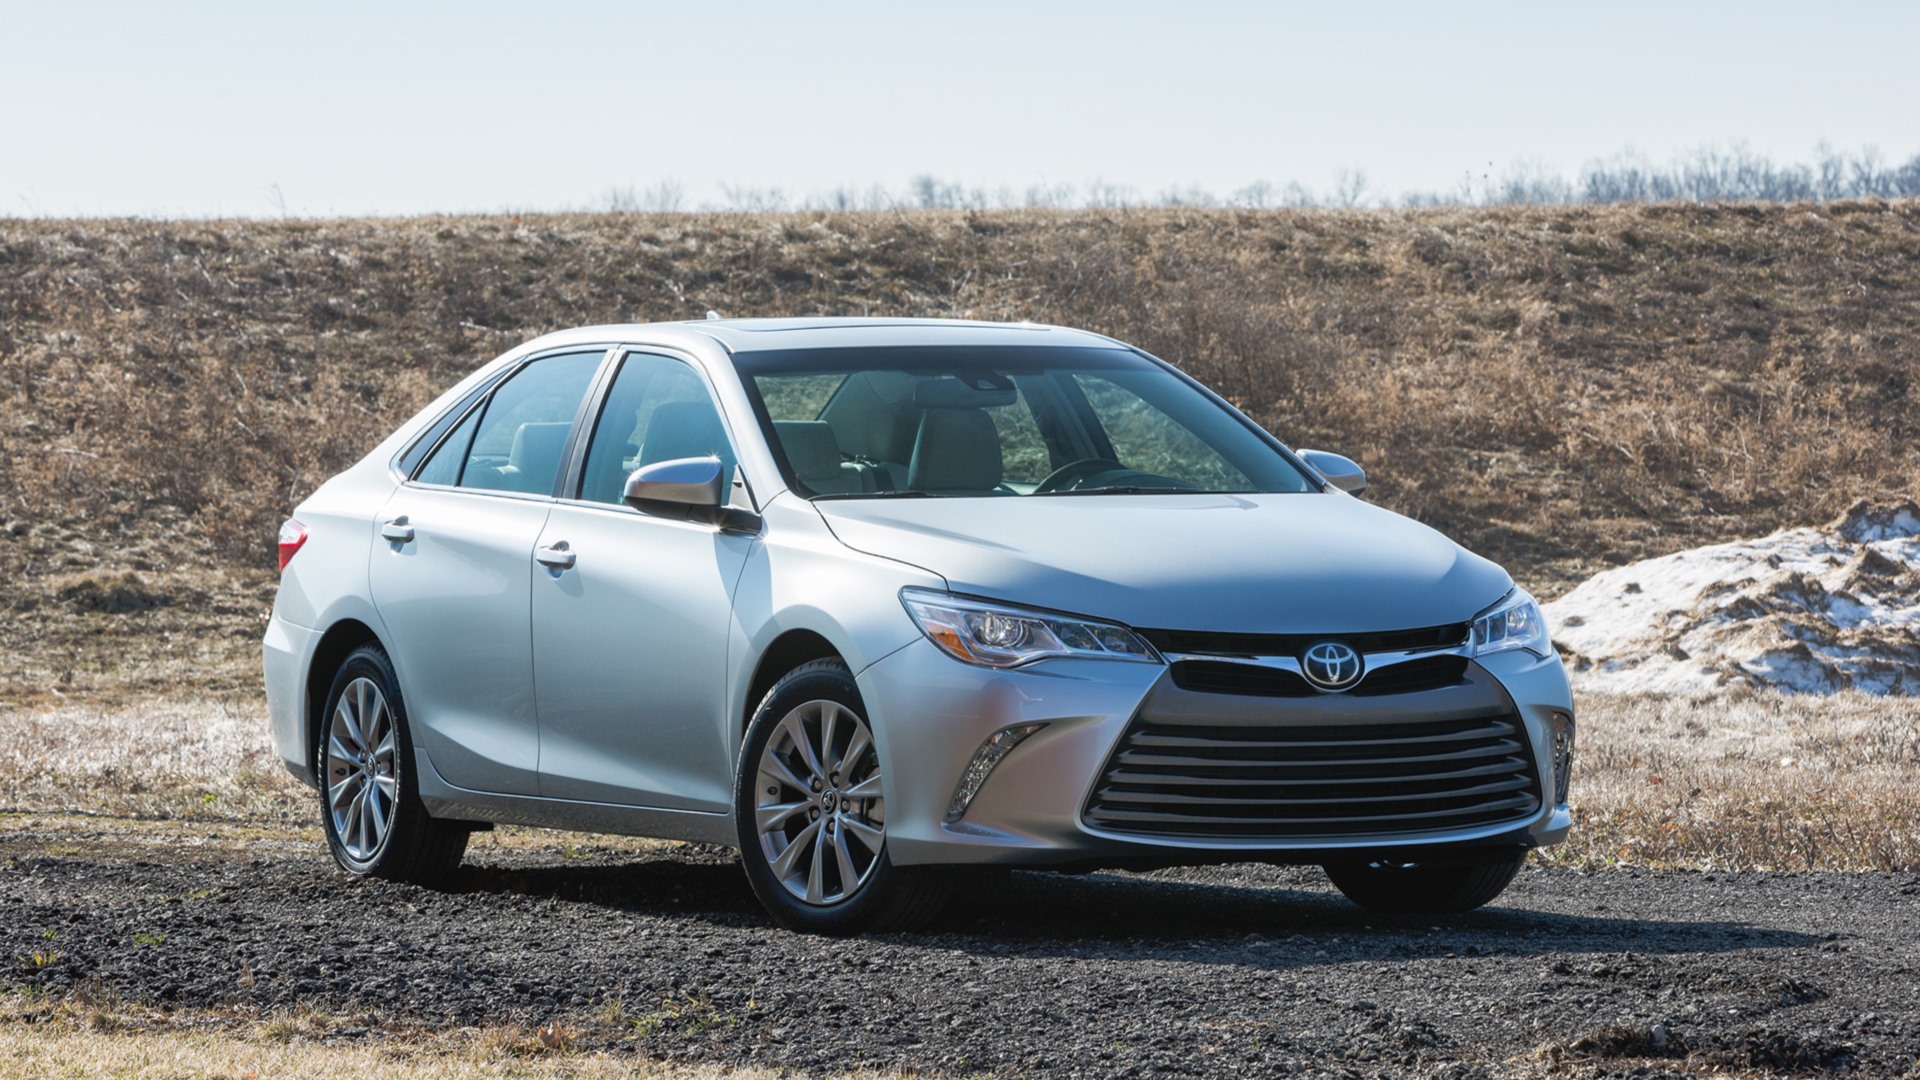 Vehicles 2015 Toyota Camry HD Wallpaper | Background Image